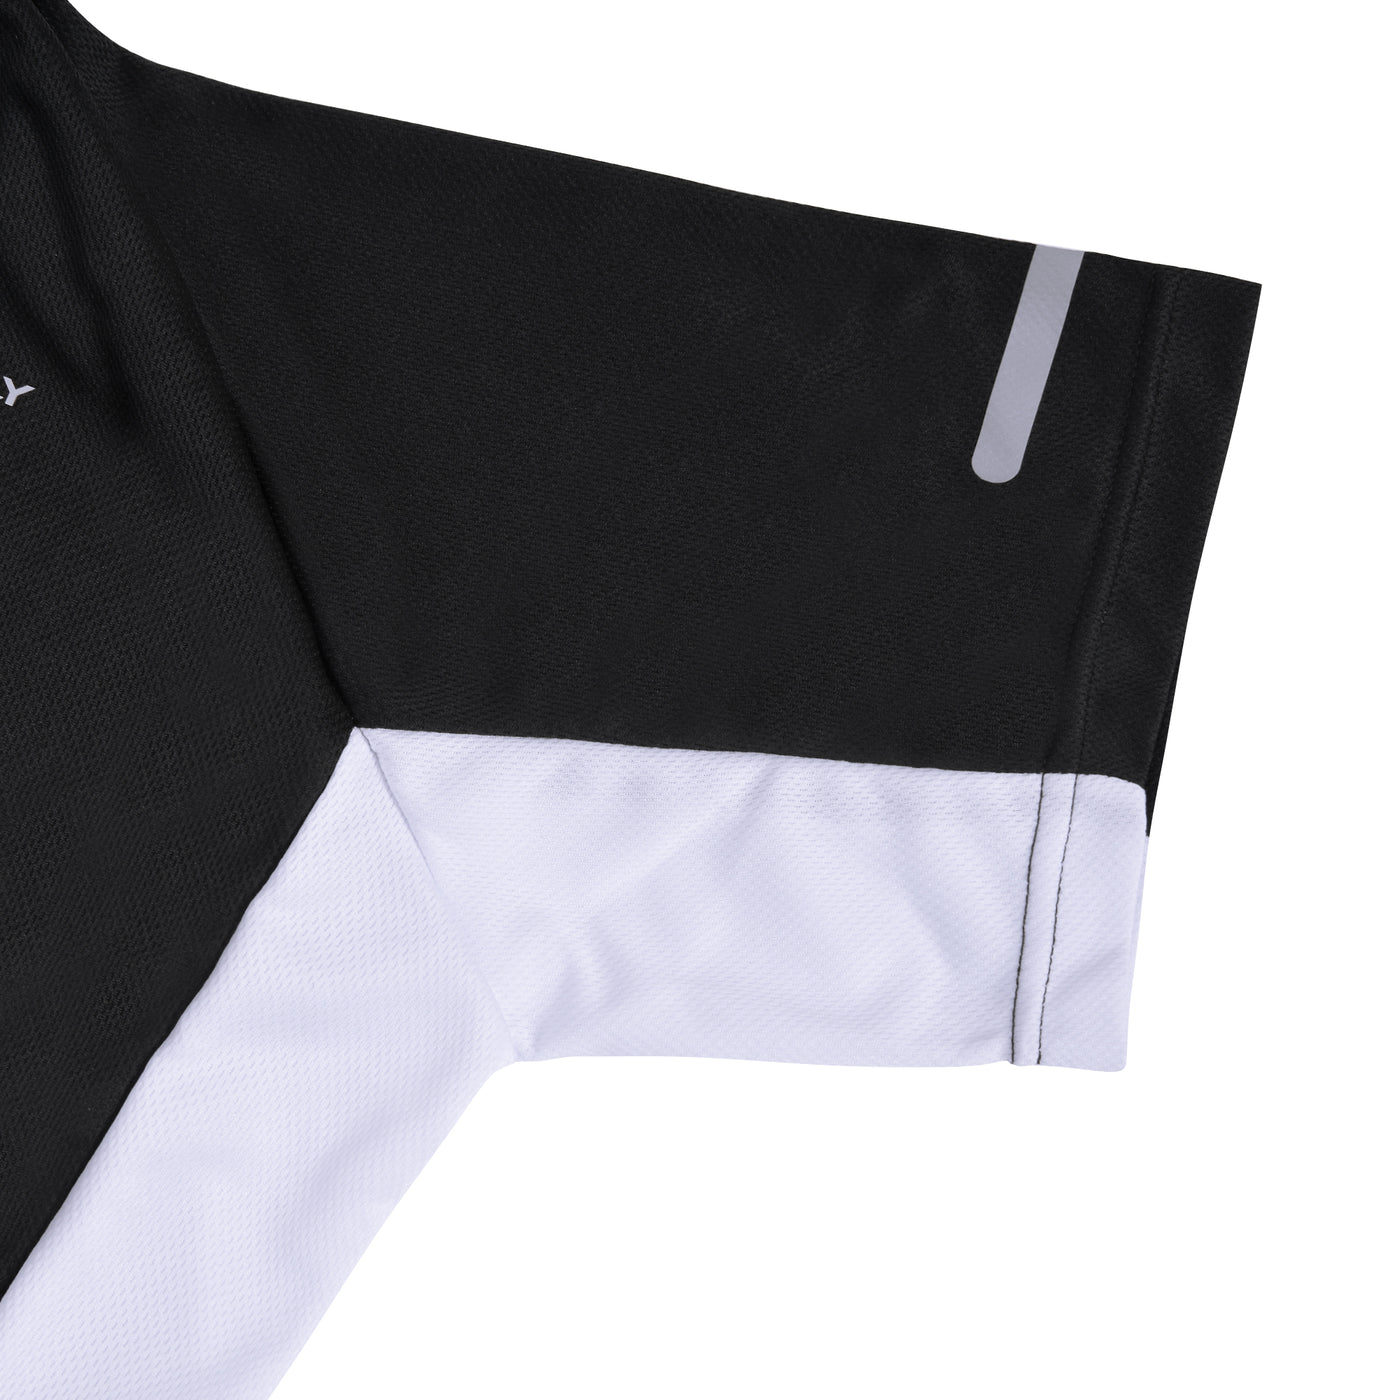 Nuckily MG0043 Short Sleeve Cycling Jersey - Cyclop.in